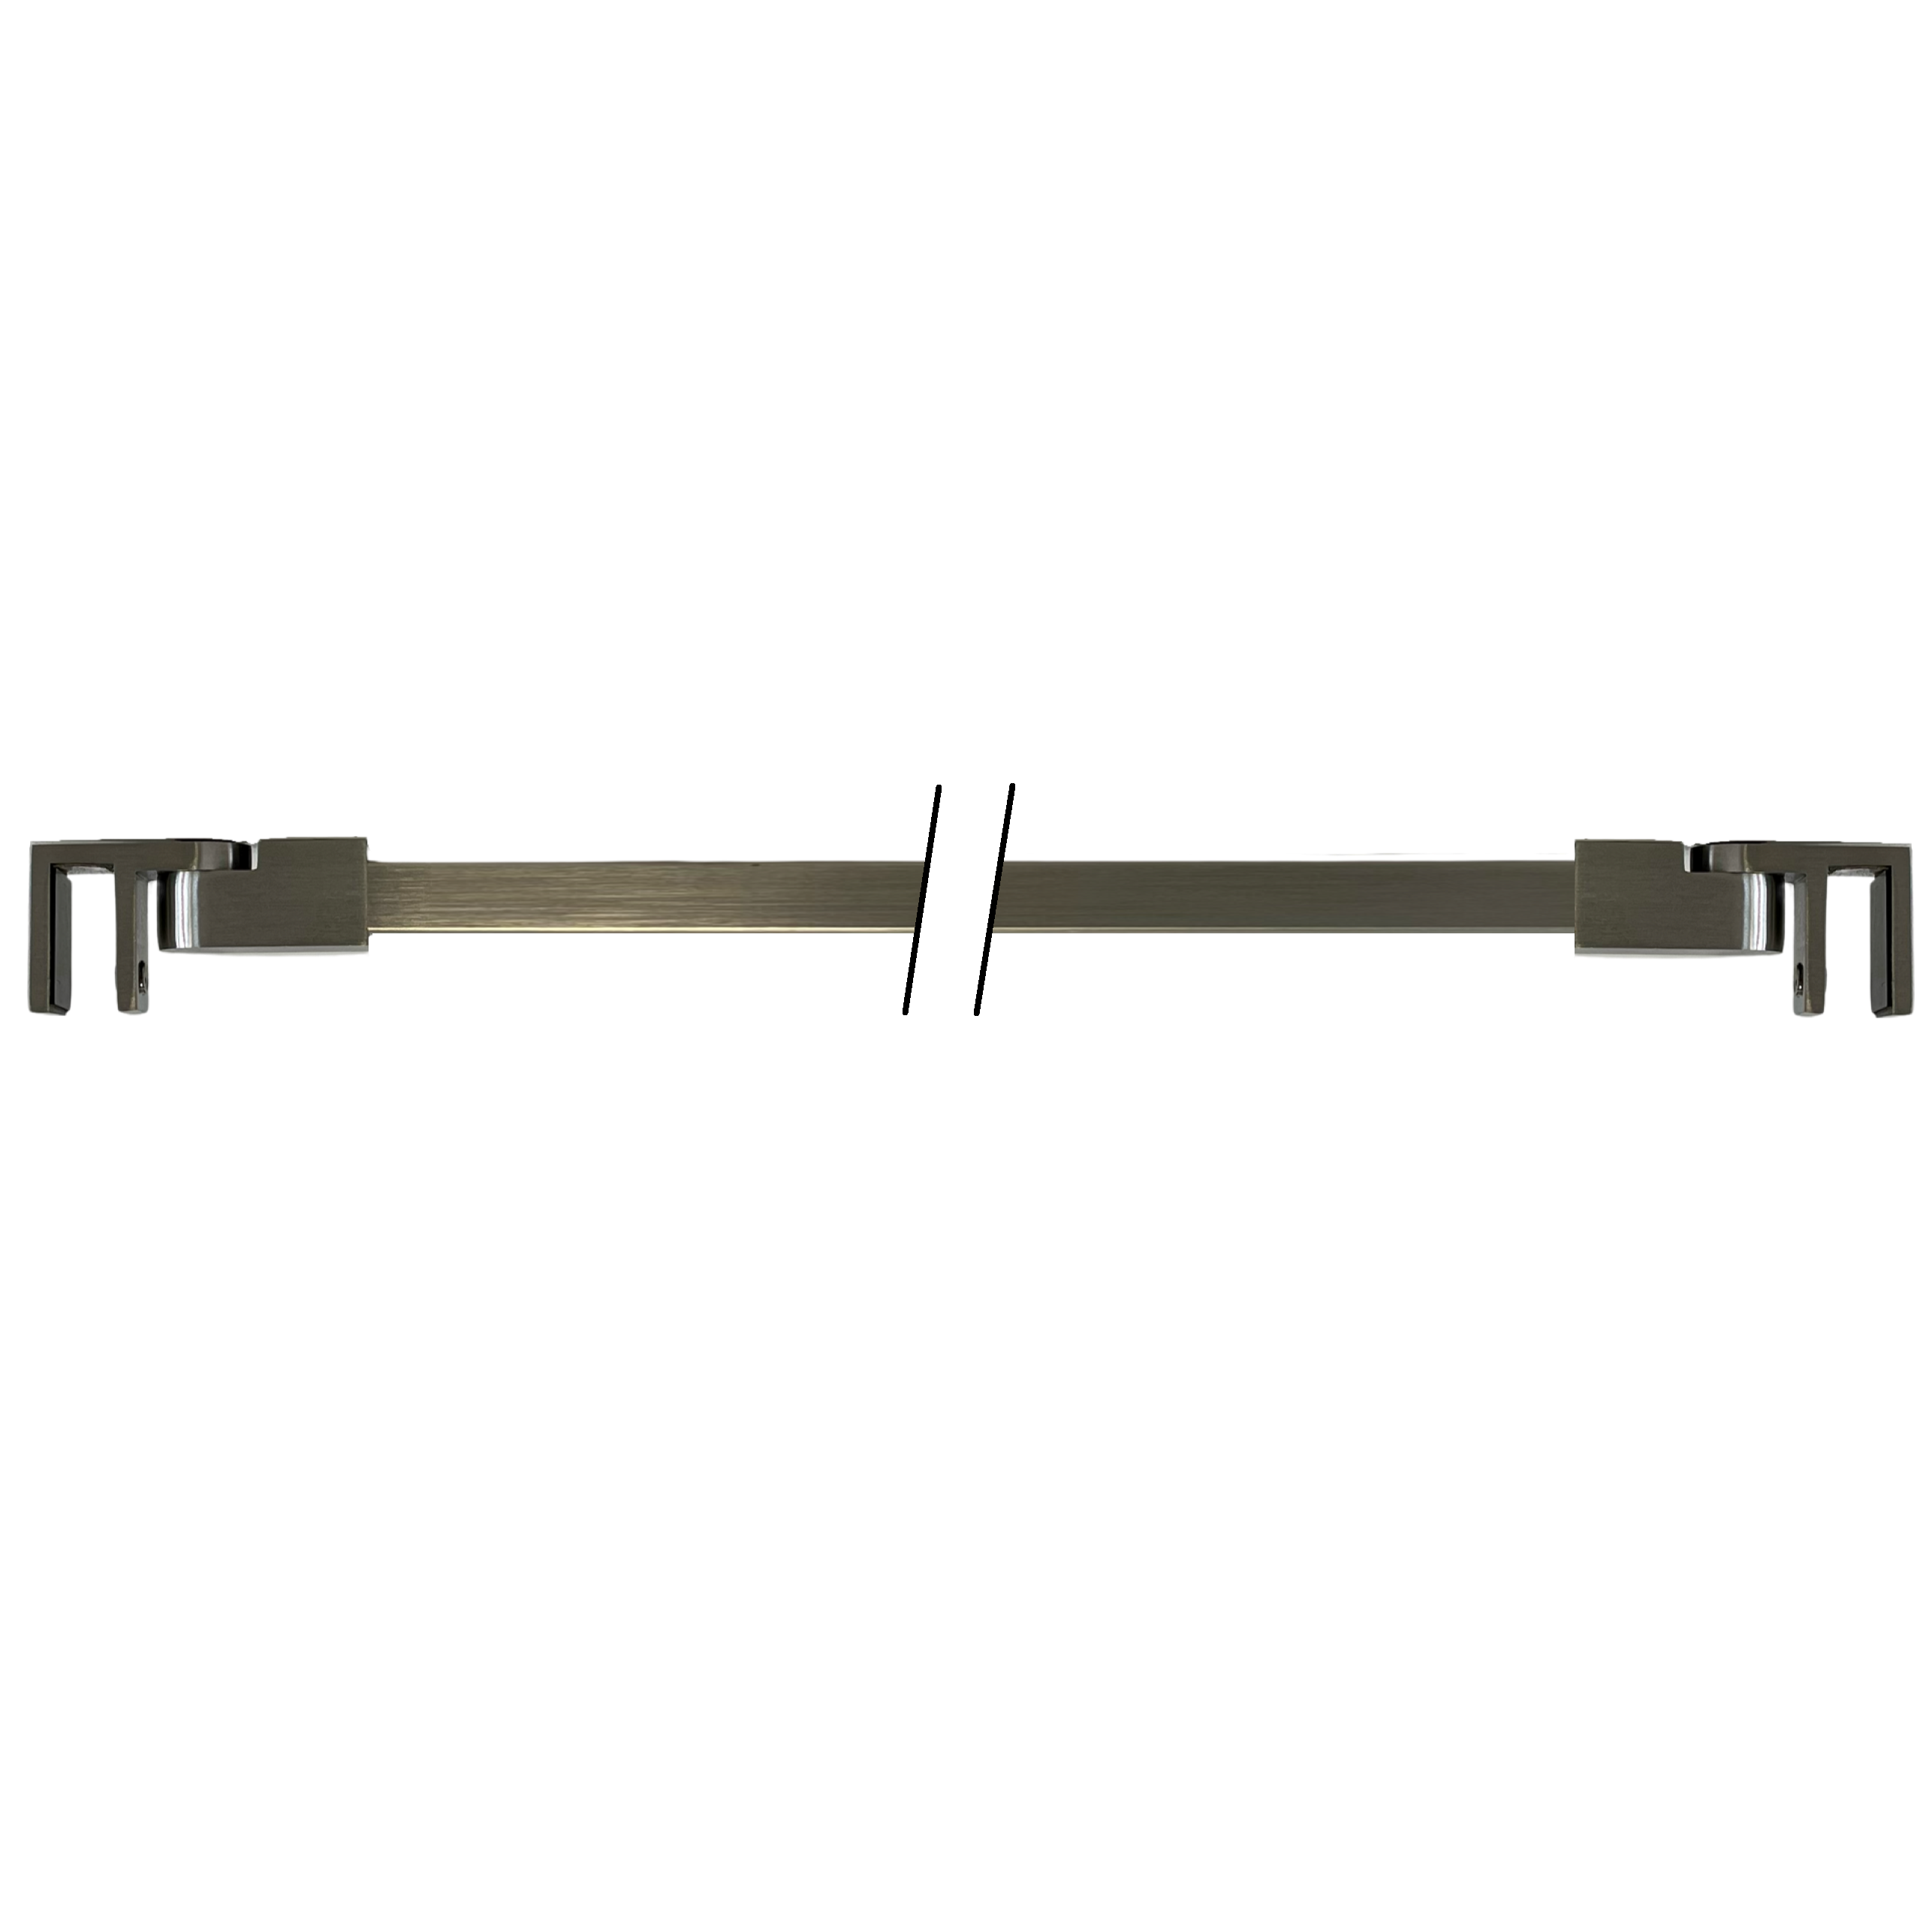 Double Sided Brace Arm 1200mm Long (Brushed Nickel)